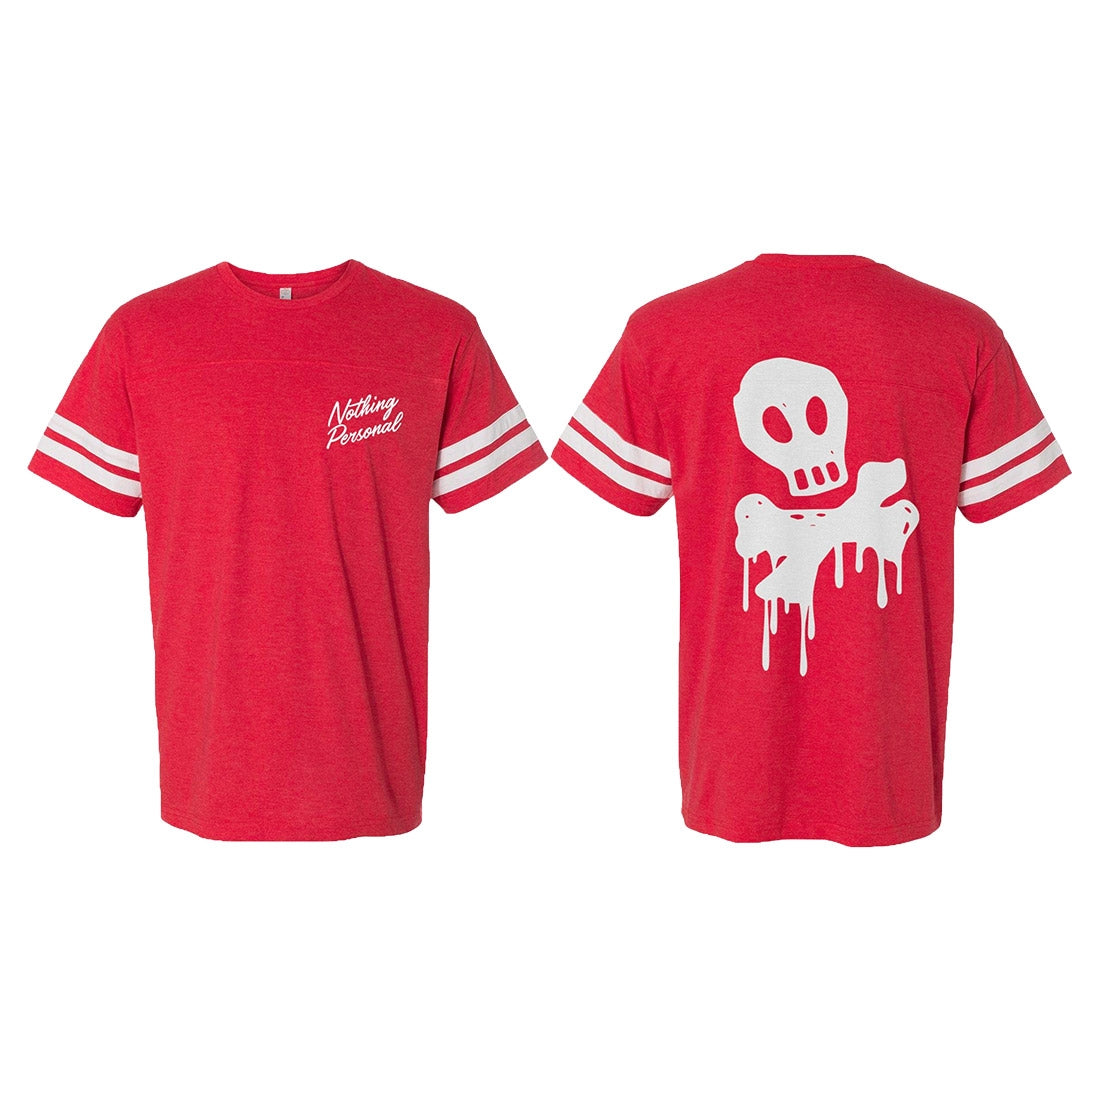 Nothing Personal Red Baseball T-Shirt